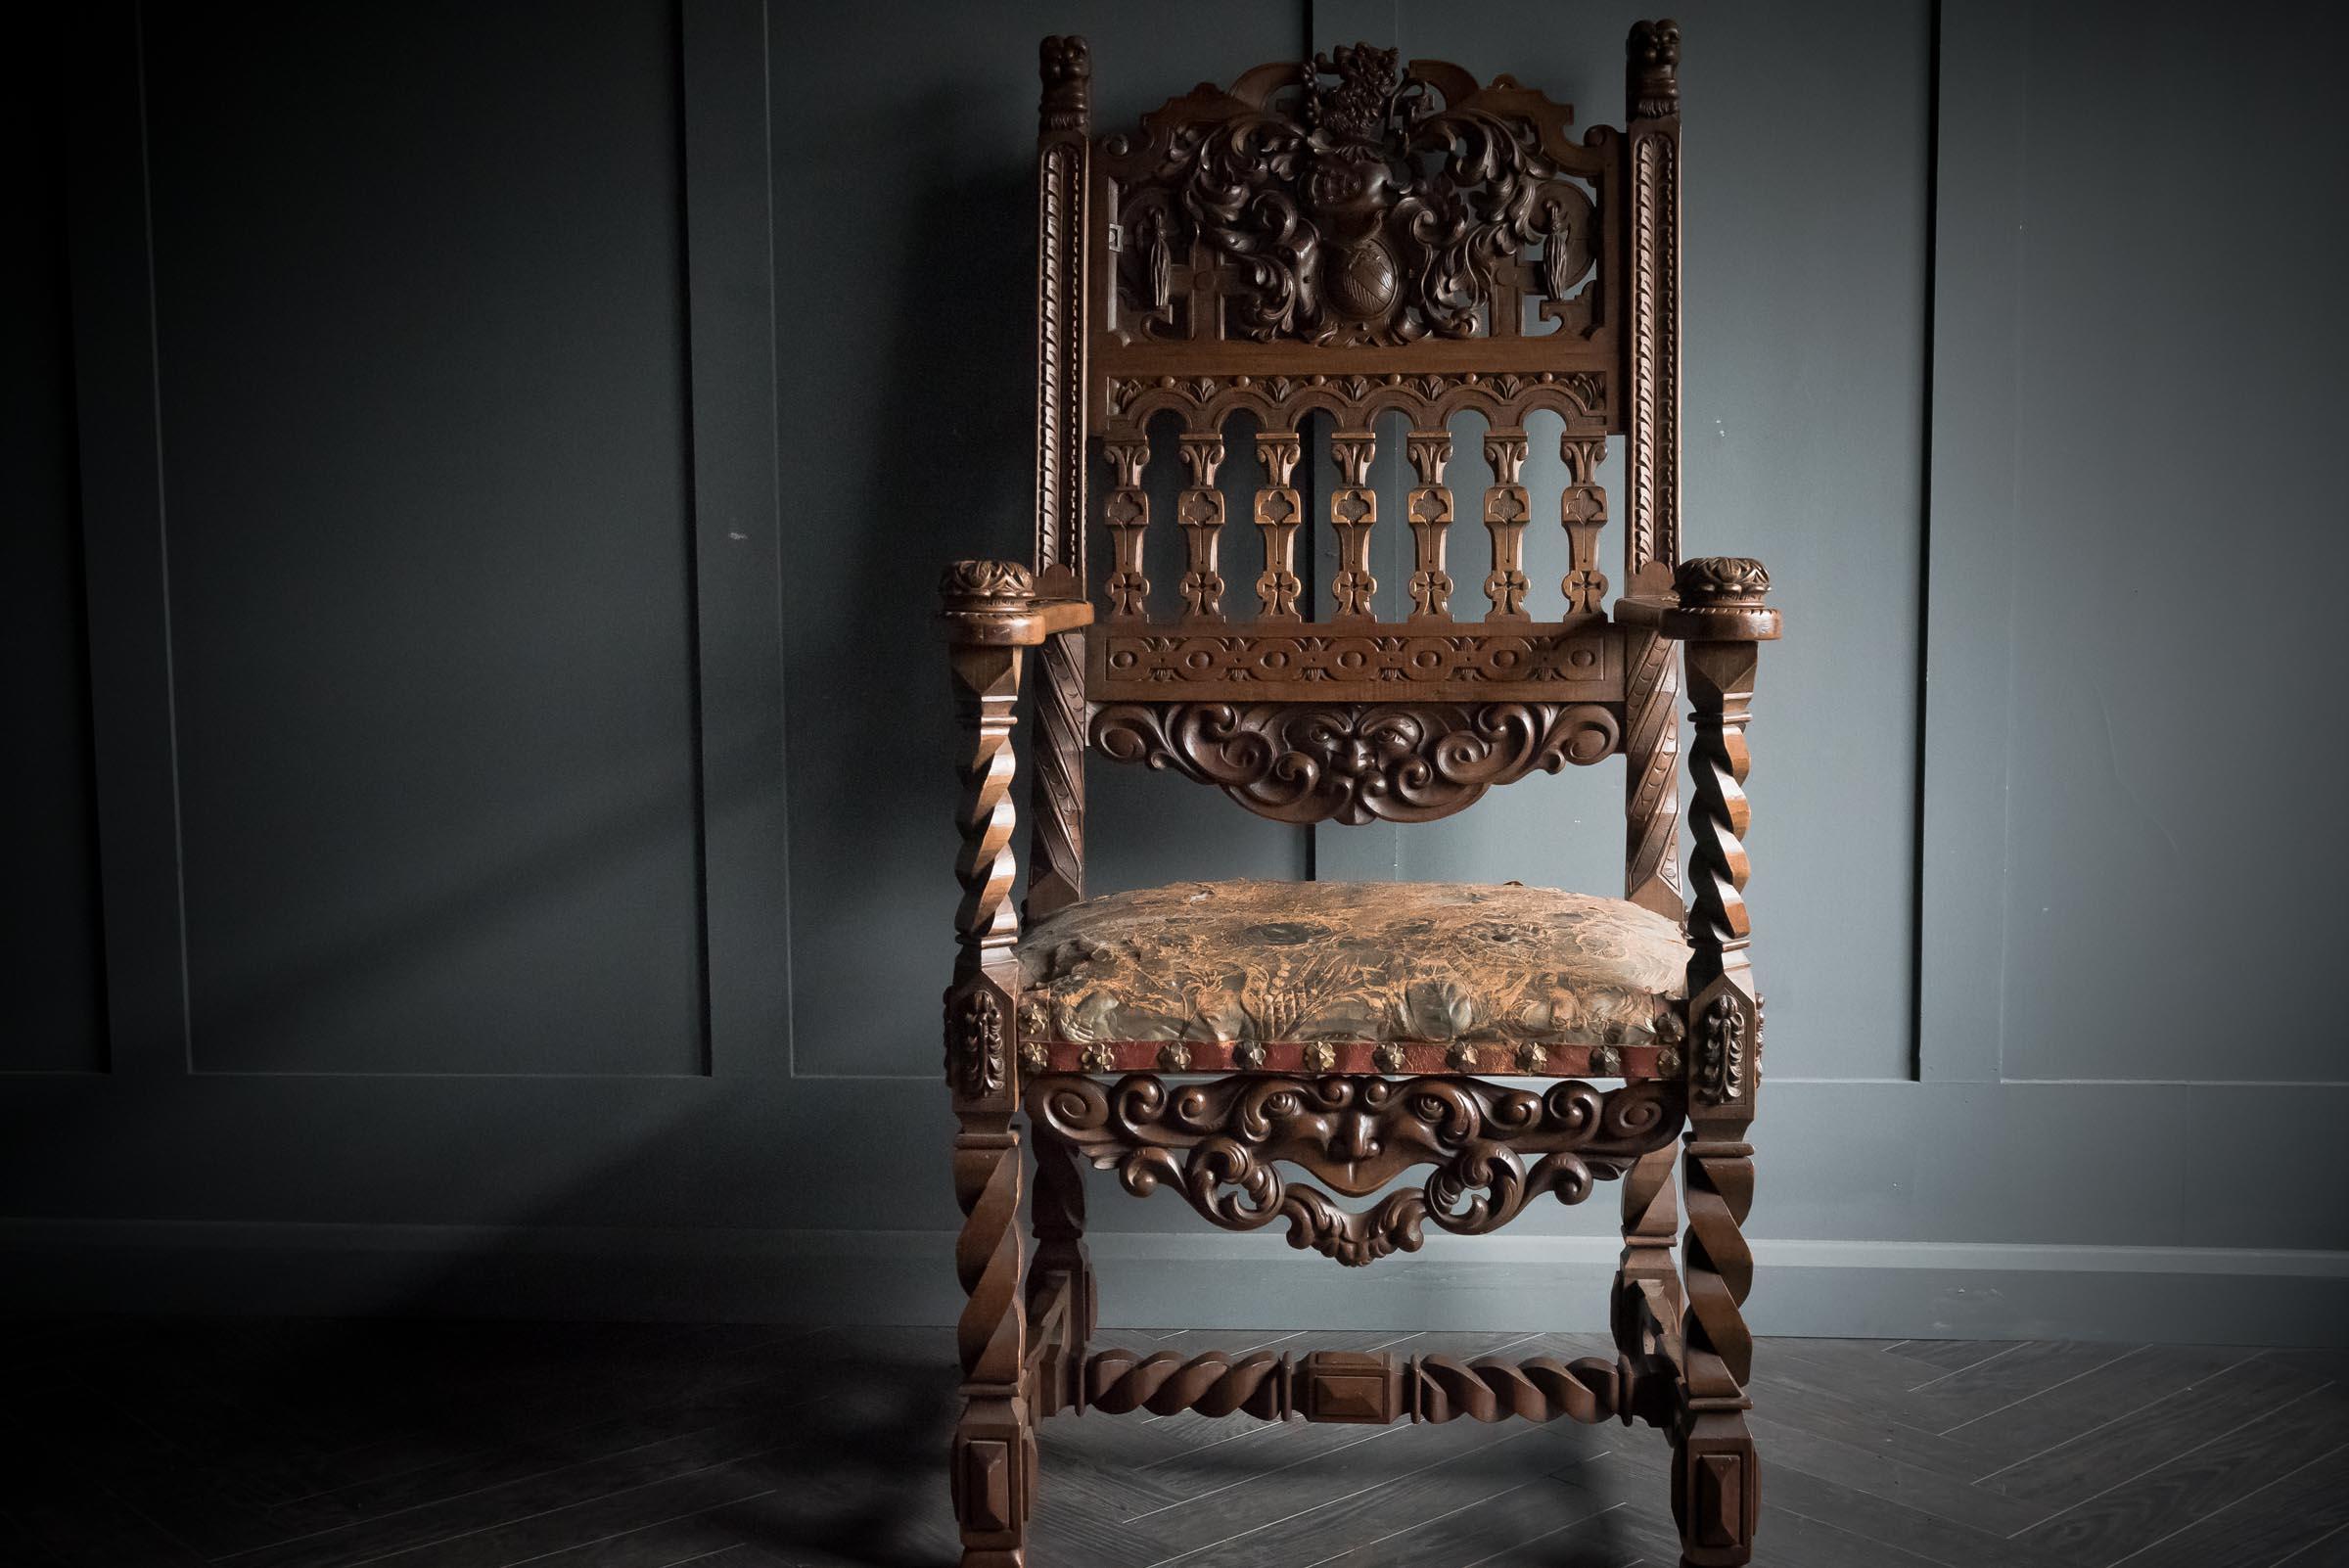 Stuningly Carved Ornate French nobleman's chair c.1850.